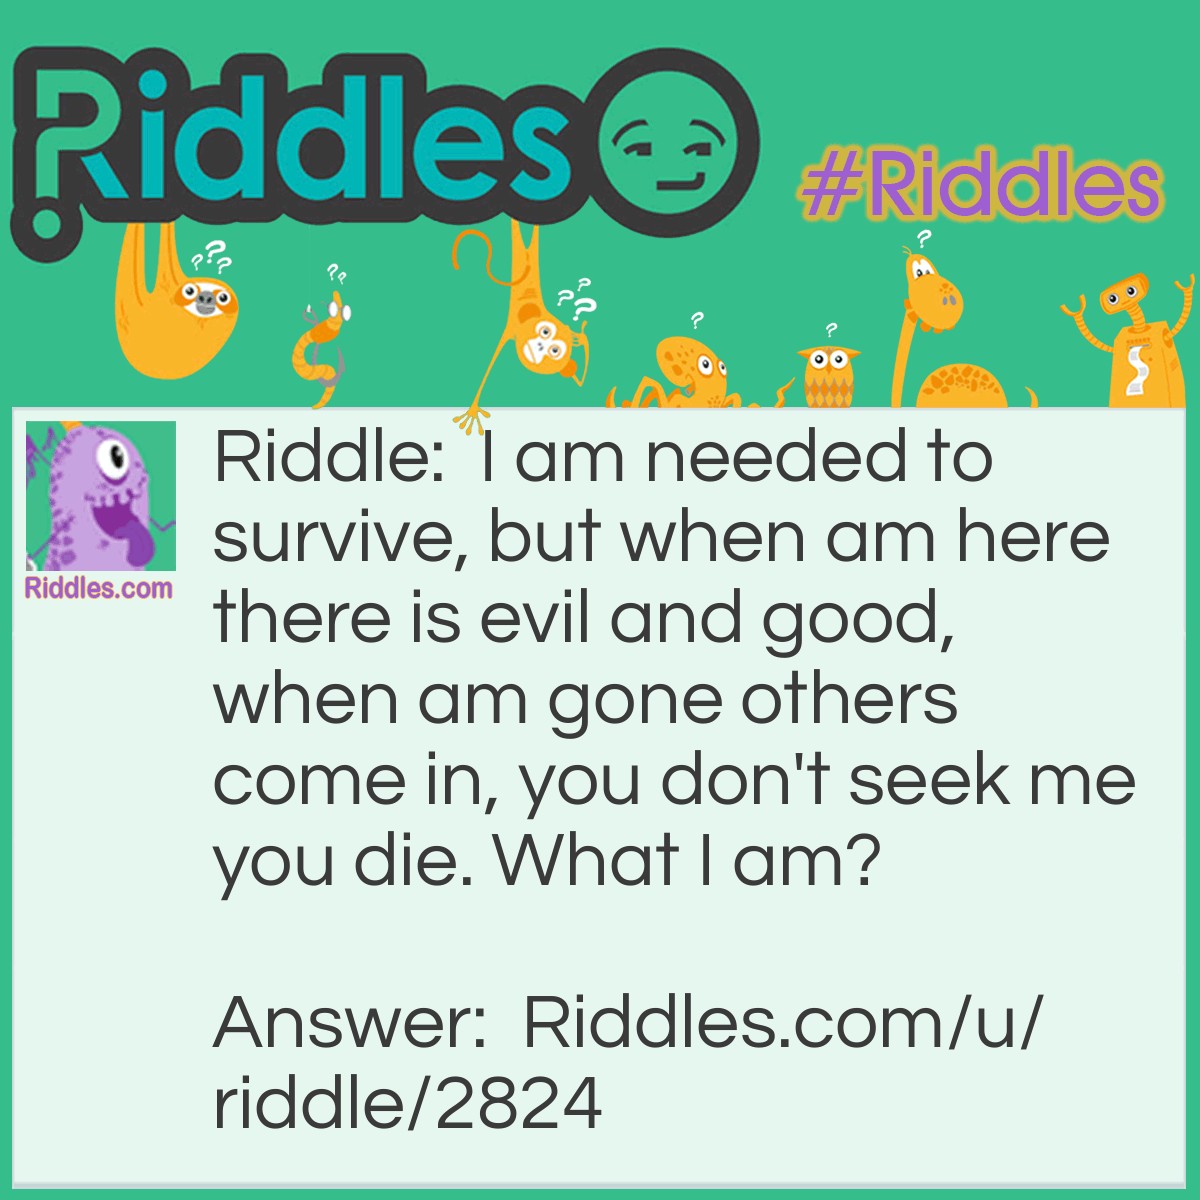 Riddle: I am needed to survive, but when am here there is evil and good, when am gone others come in, you don't seek me you die. What I am? Answer: Money.